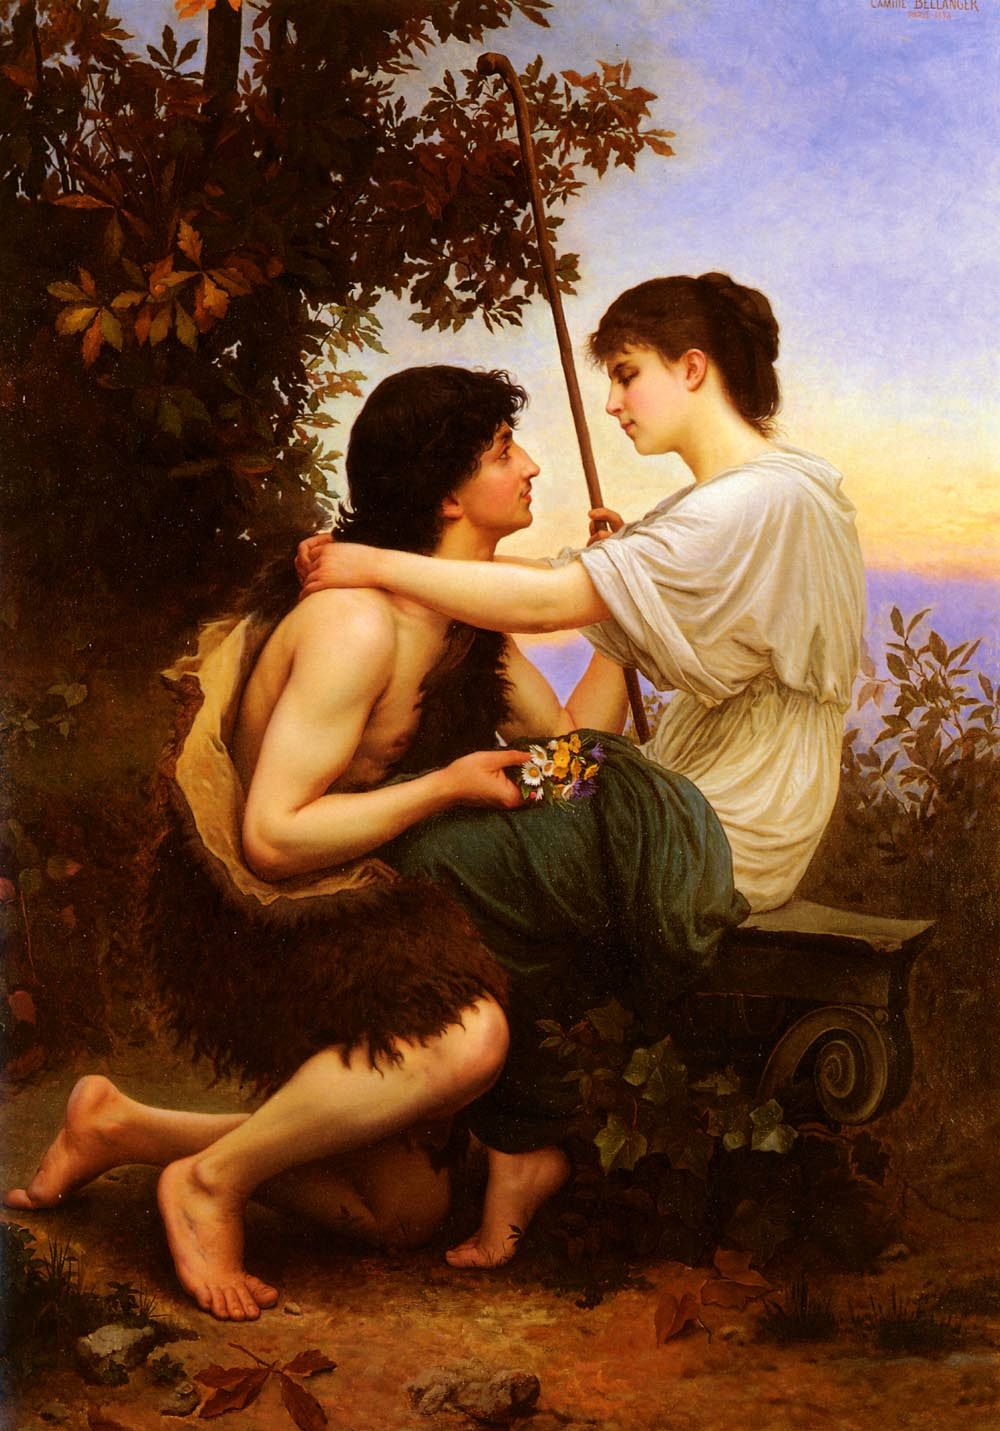 Idylle (Daphnis And Chloe) by Camille Felix Bellanger